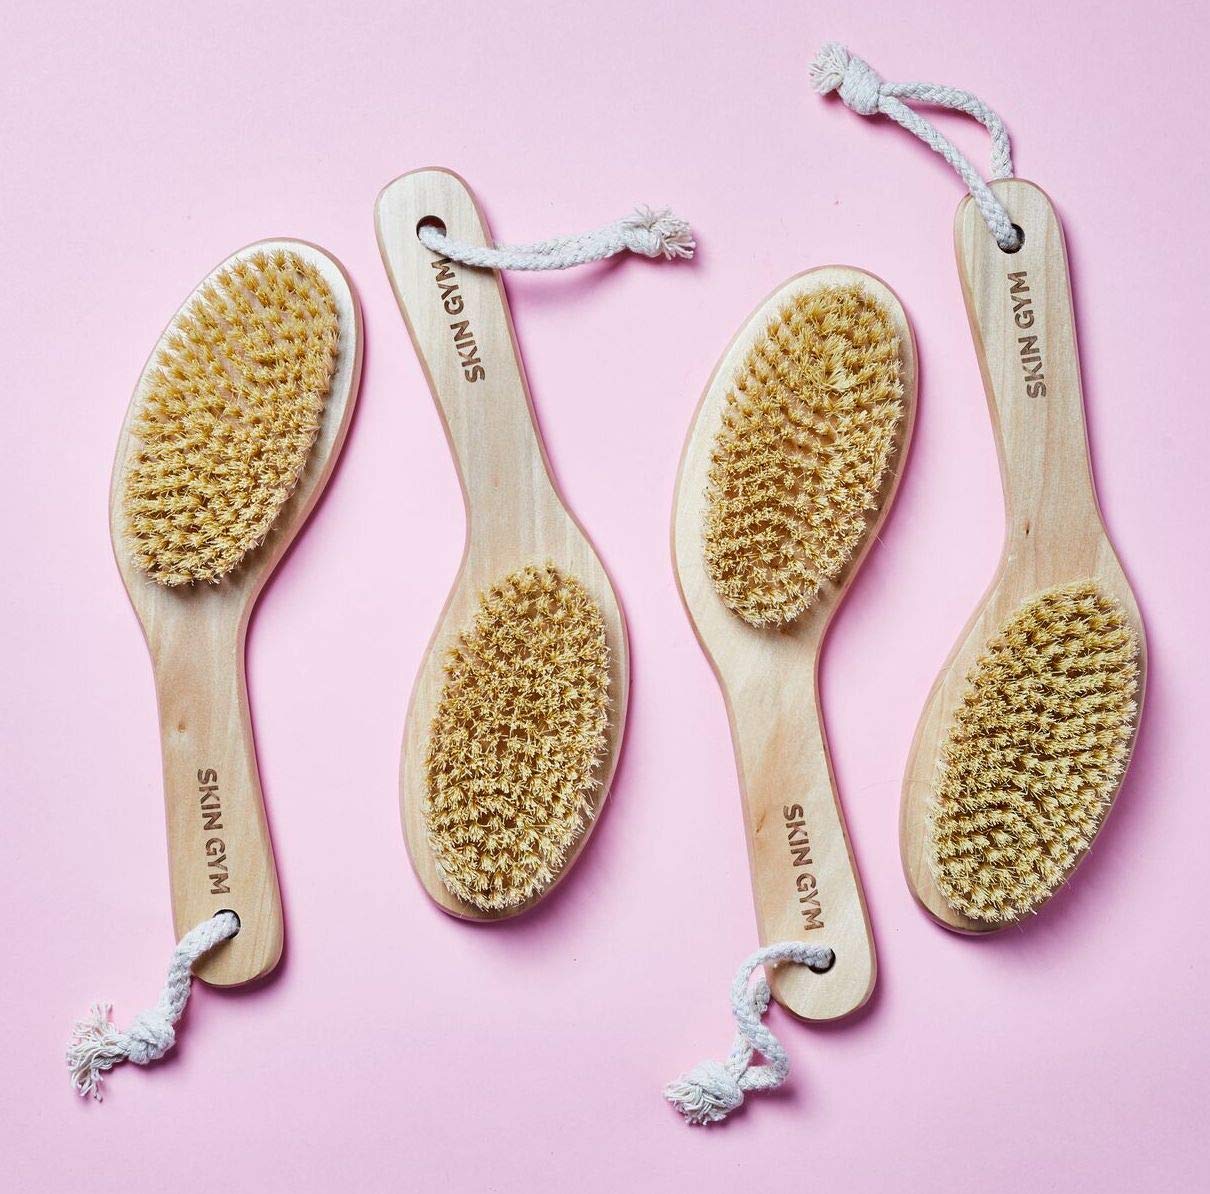 Skin Gym Dry Body Brush Exfoliating Bath Scrubber with Soft and Stiff Bristles For Cellulite Treatment, Lymphatic Drainage and Blood Circulation Improvement